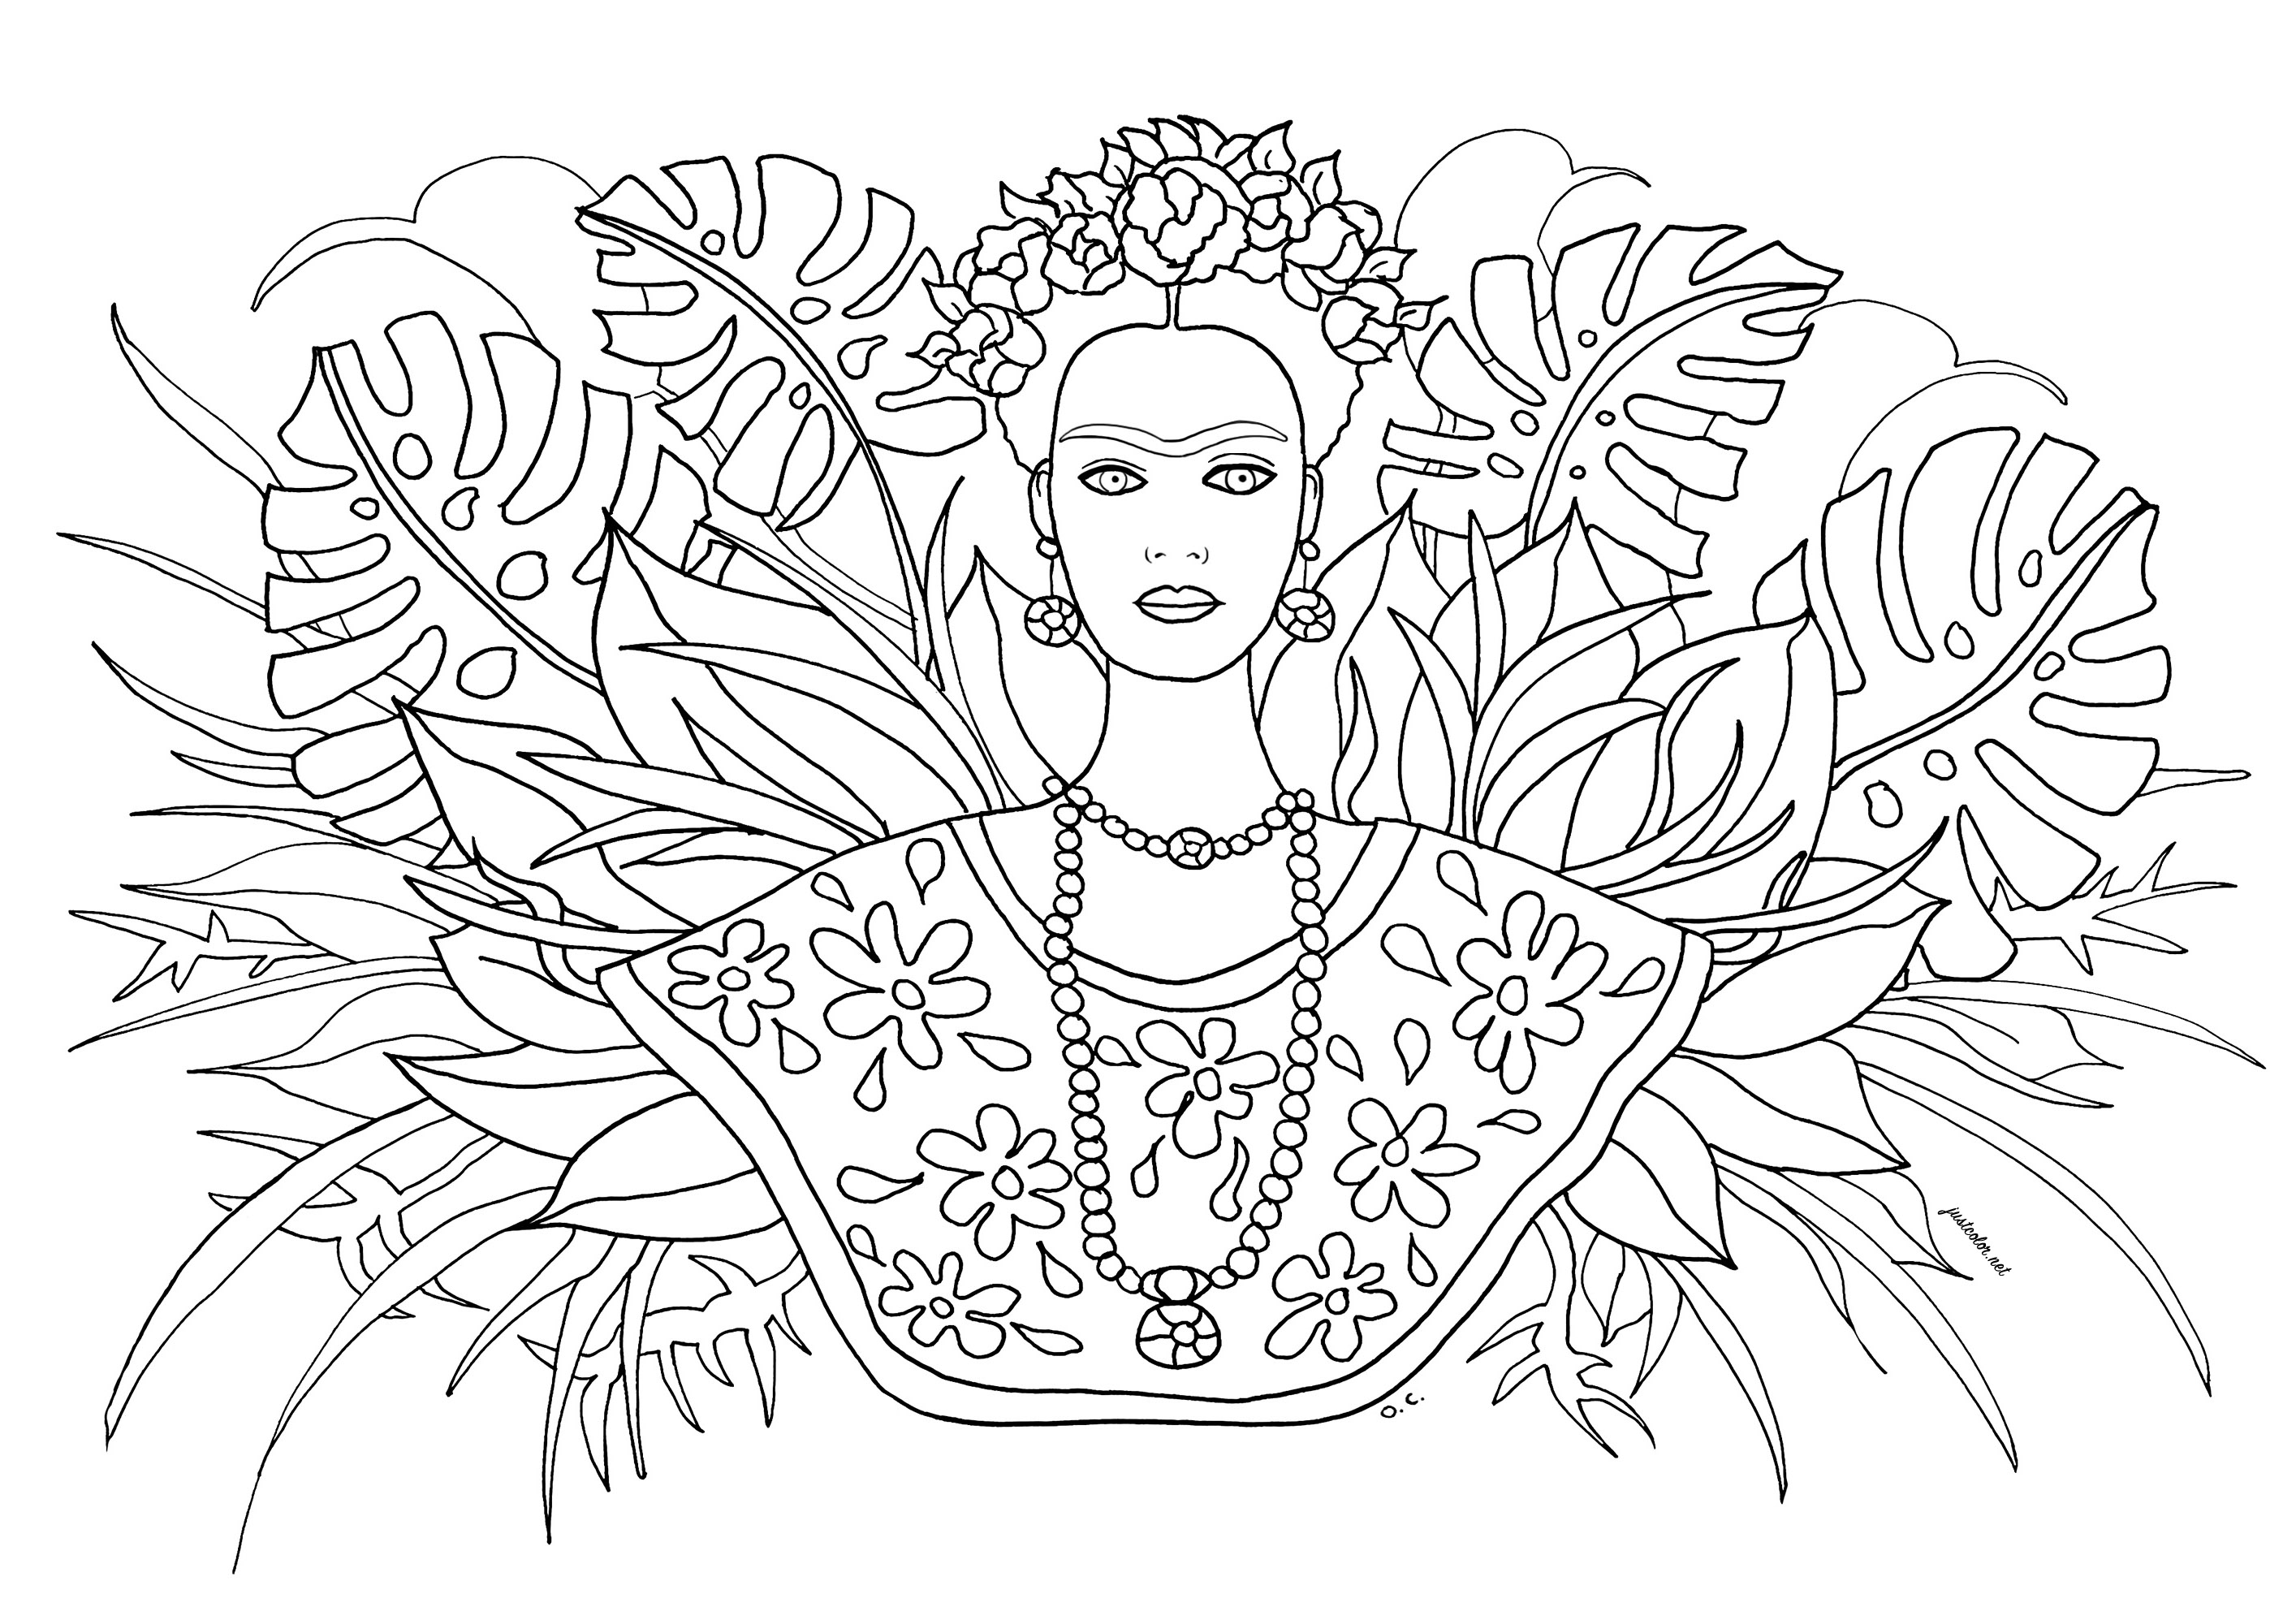 Frida Kahlo surrounded by many leaves. This coloring page for children is inspired by the life and work of Frida Kahlo, a famous Mexican artist.